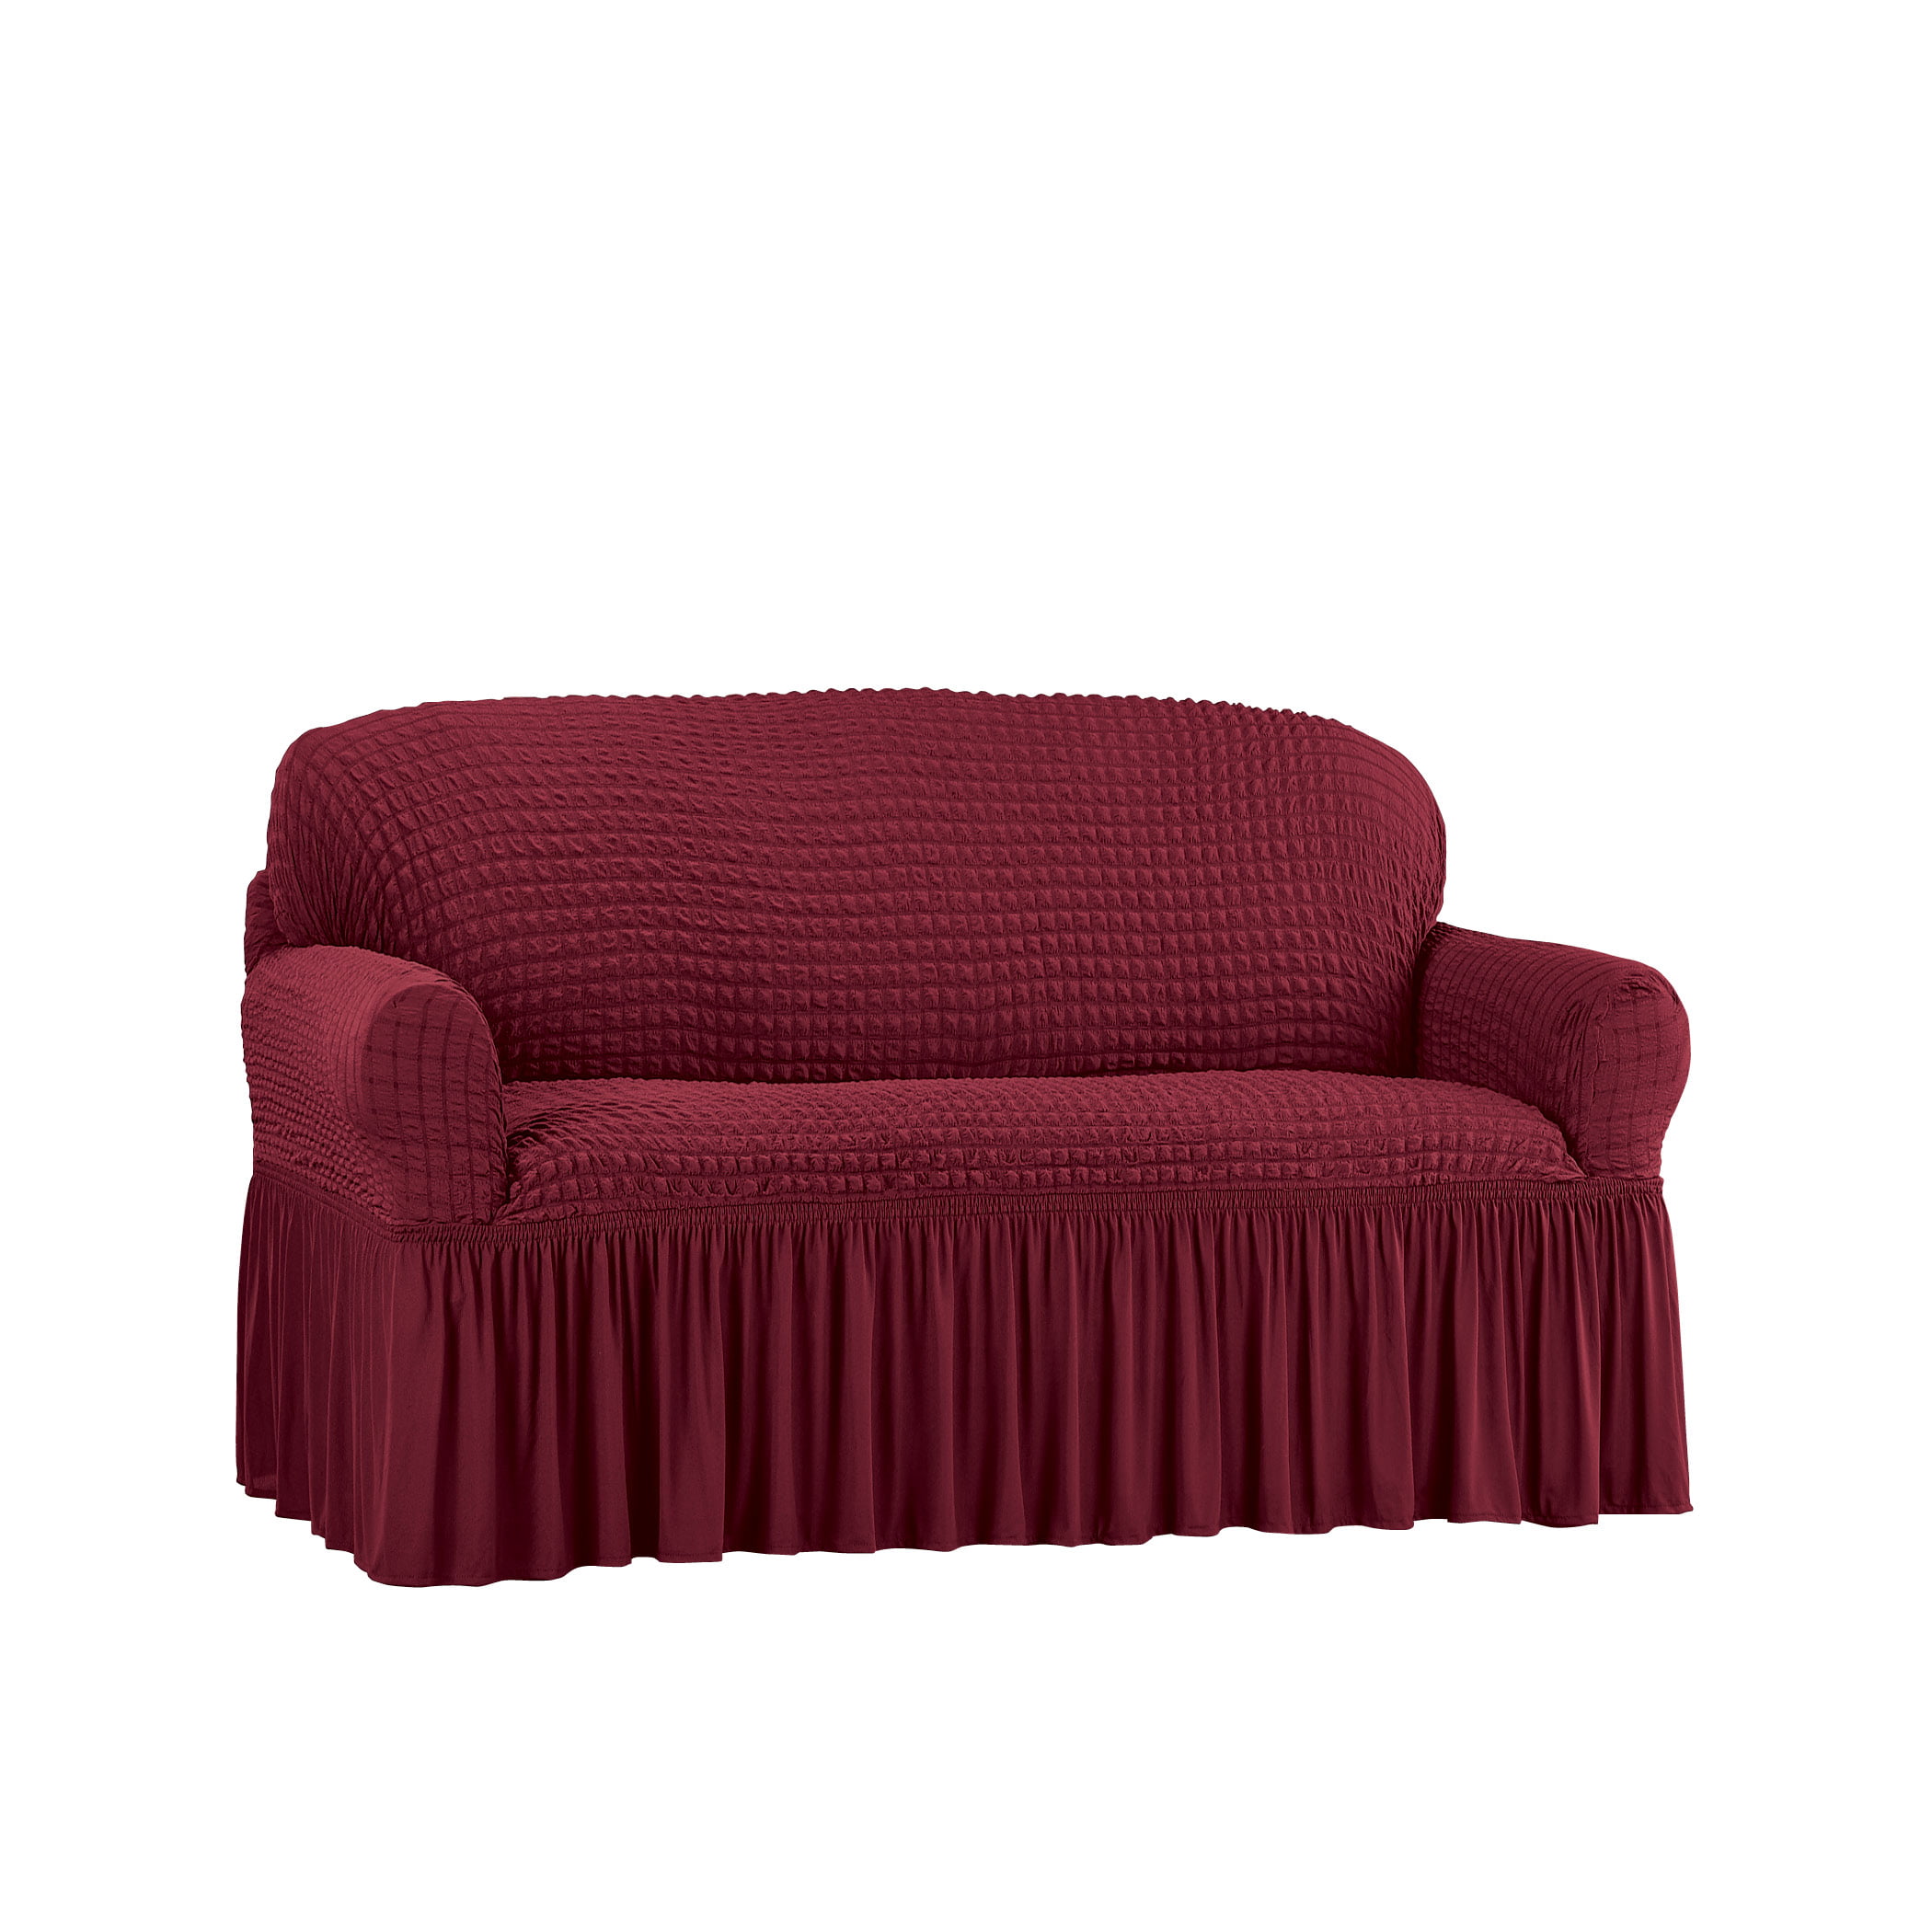 Textured Squares Ruffled Slipcover 